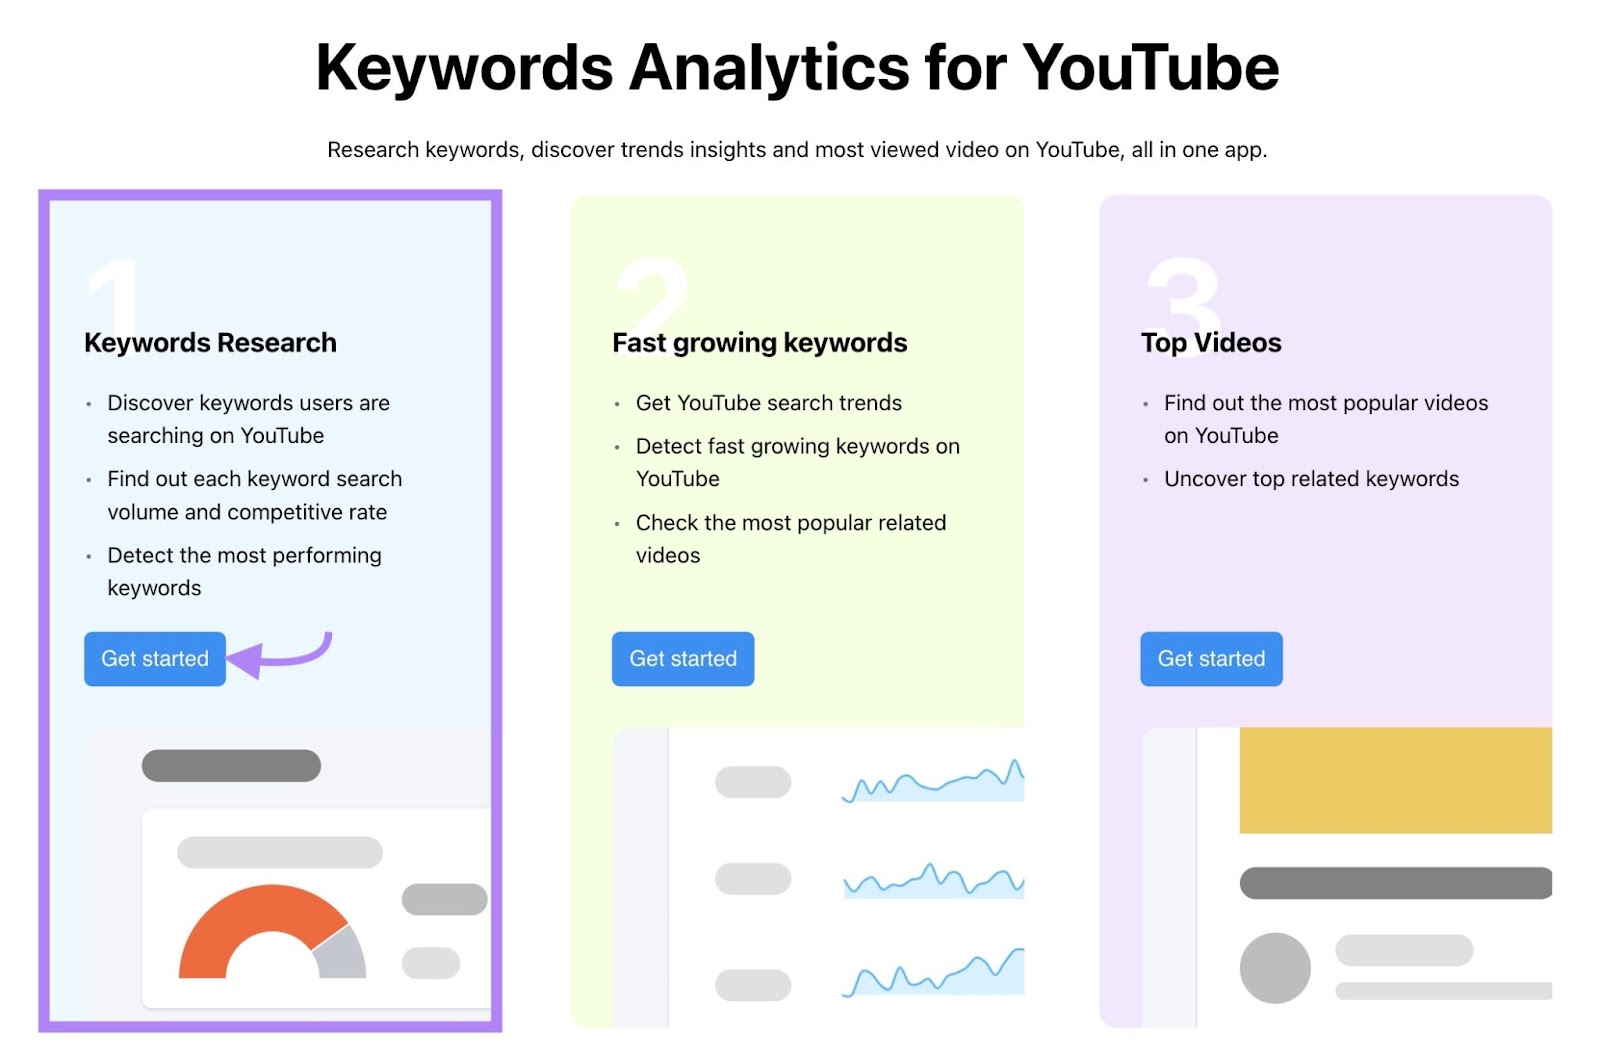 Keyword Analytics for Youtube tool start with “Get started” under “Keywords Research” clicked.